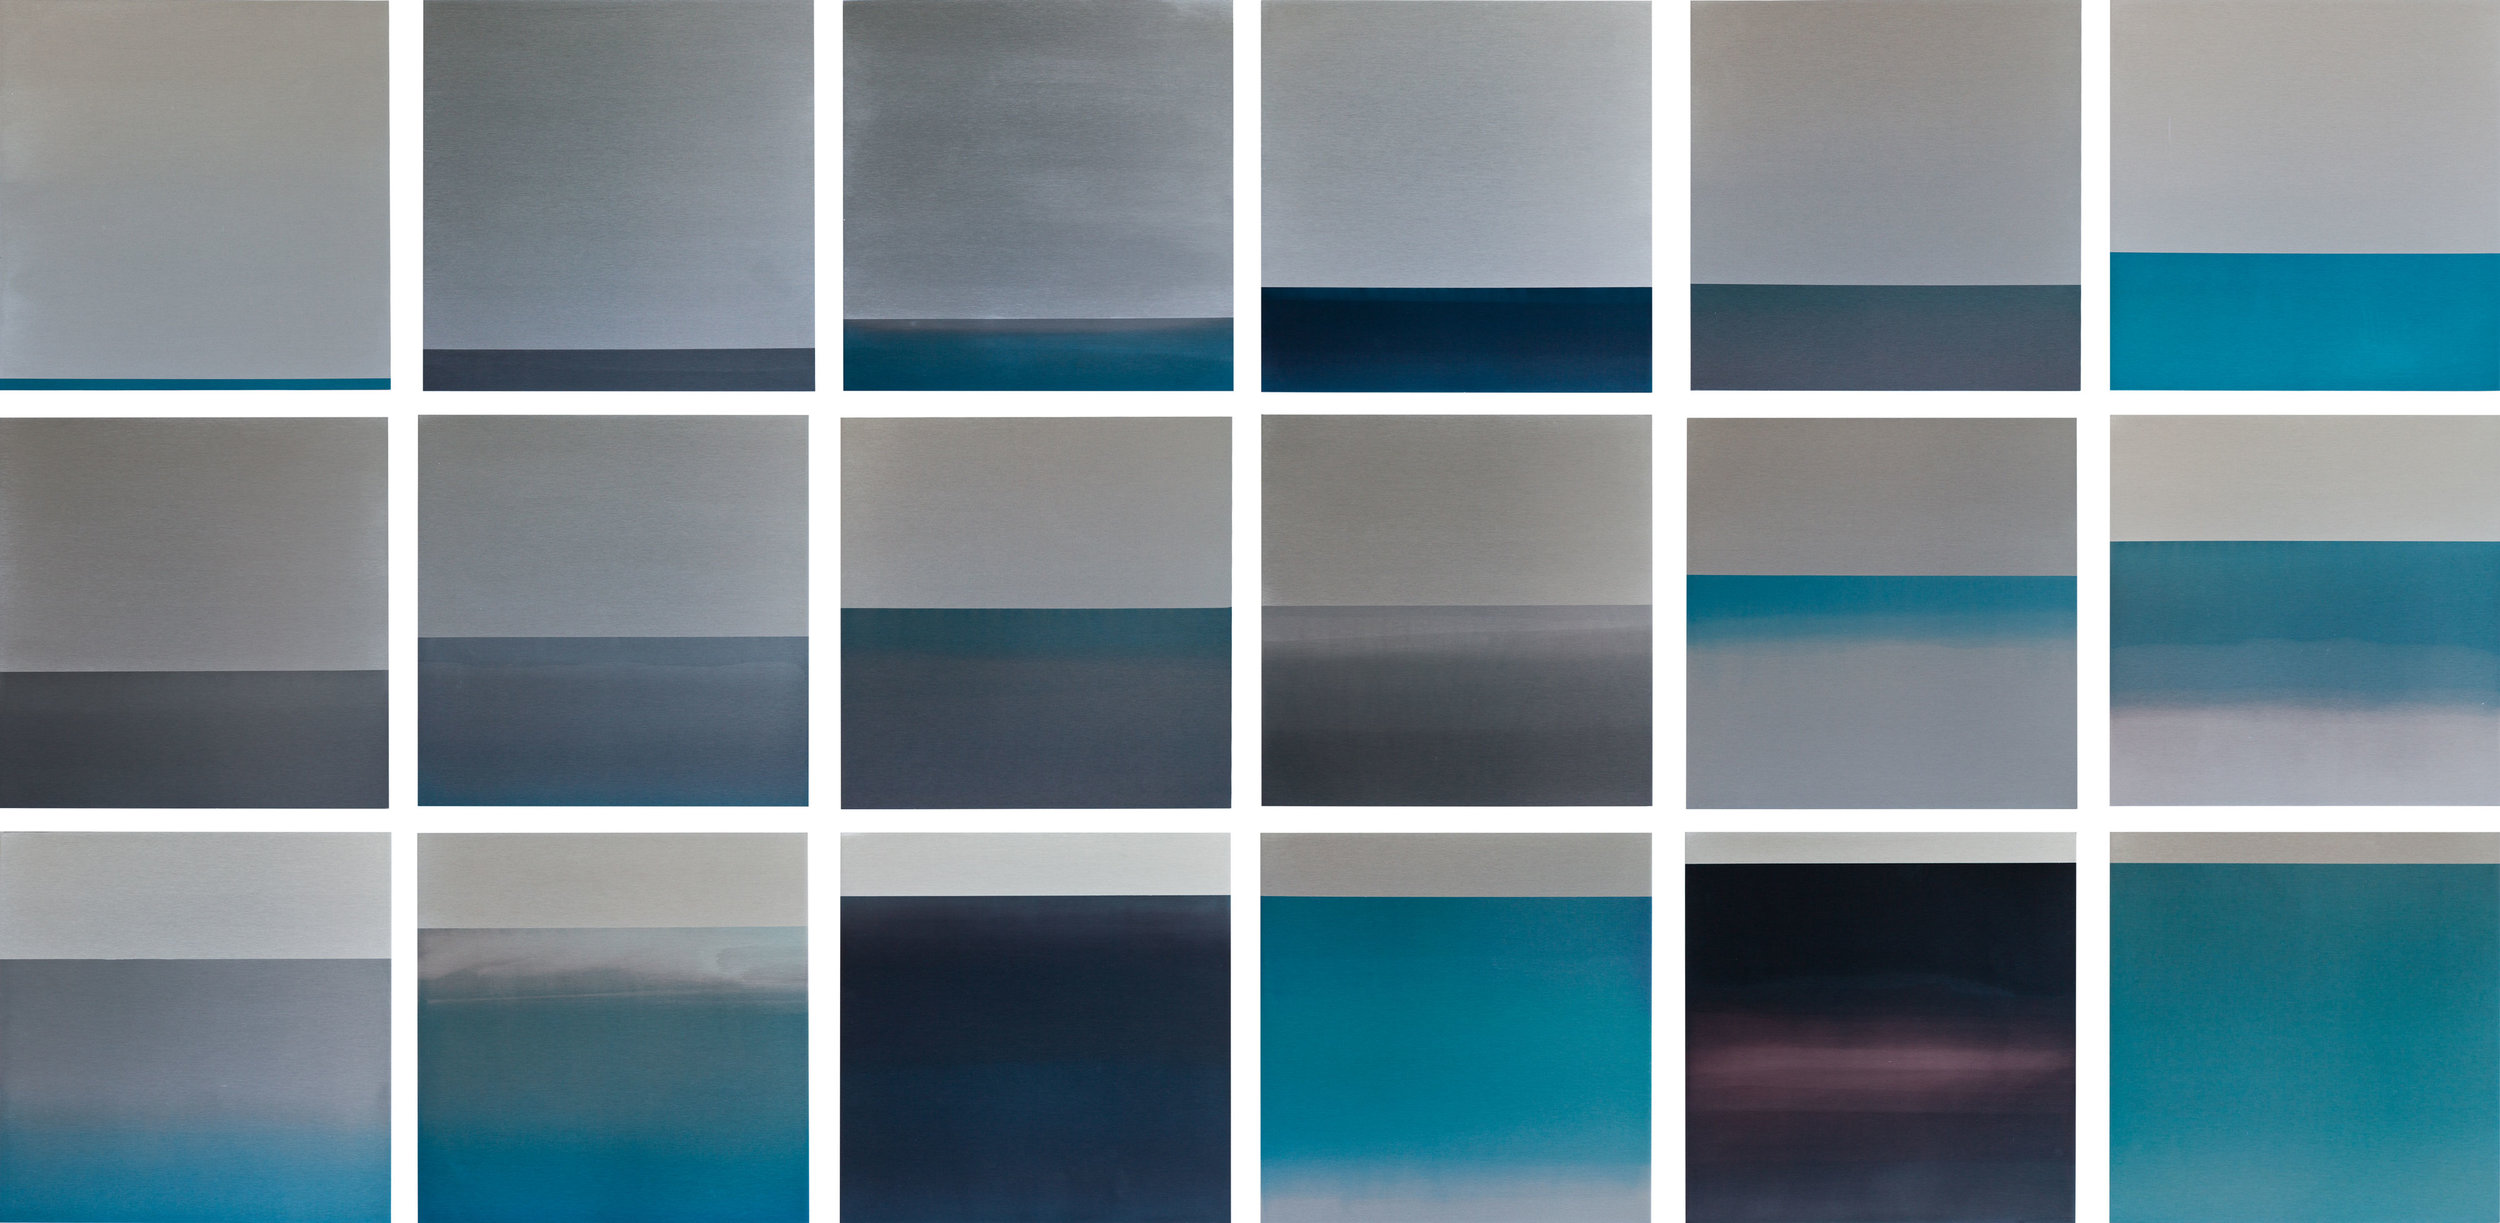  TIDES, 2011 WATER, DYE, ANODIZED ALUMINUM 36 X 72 INCHES (EACH PANEL 12X12 INCHES) 